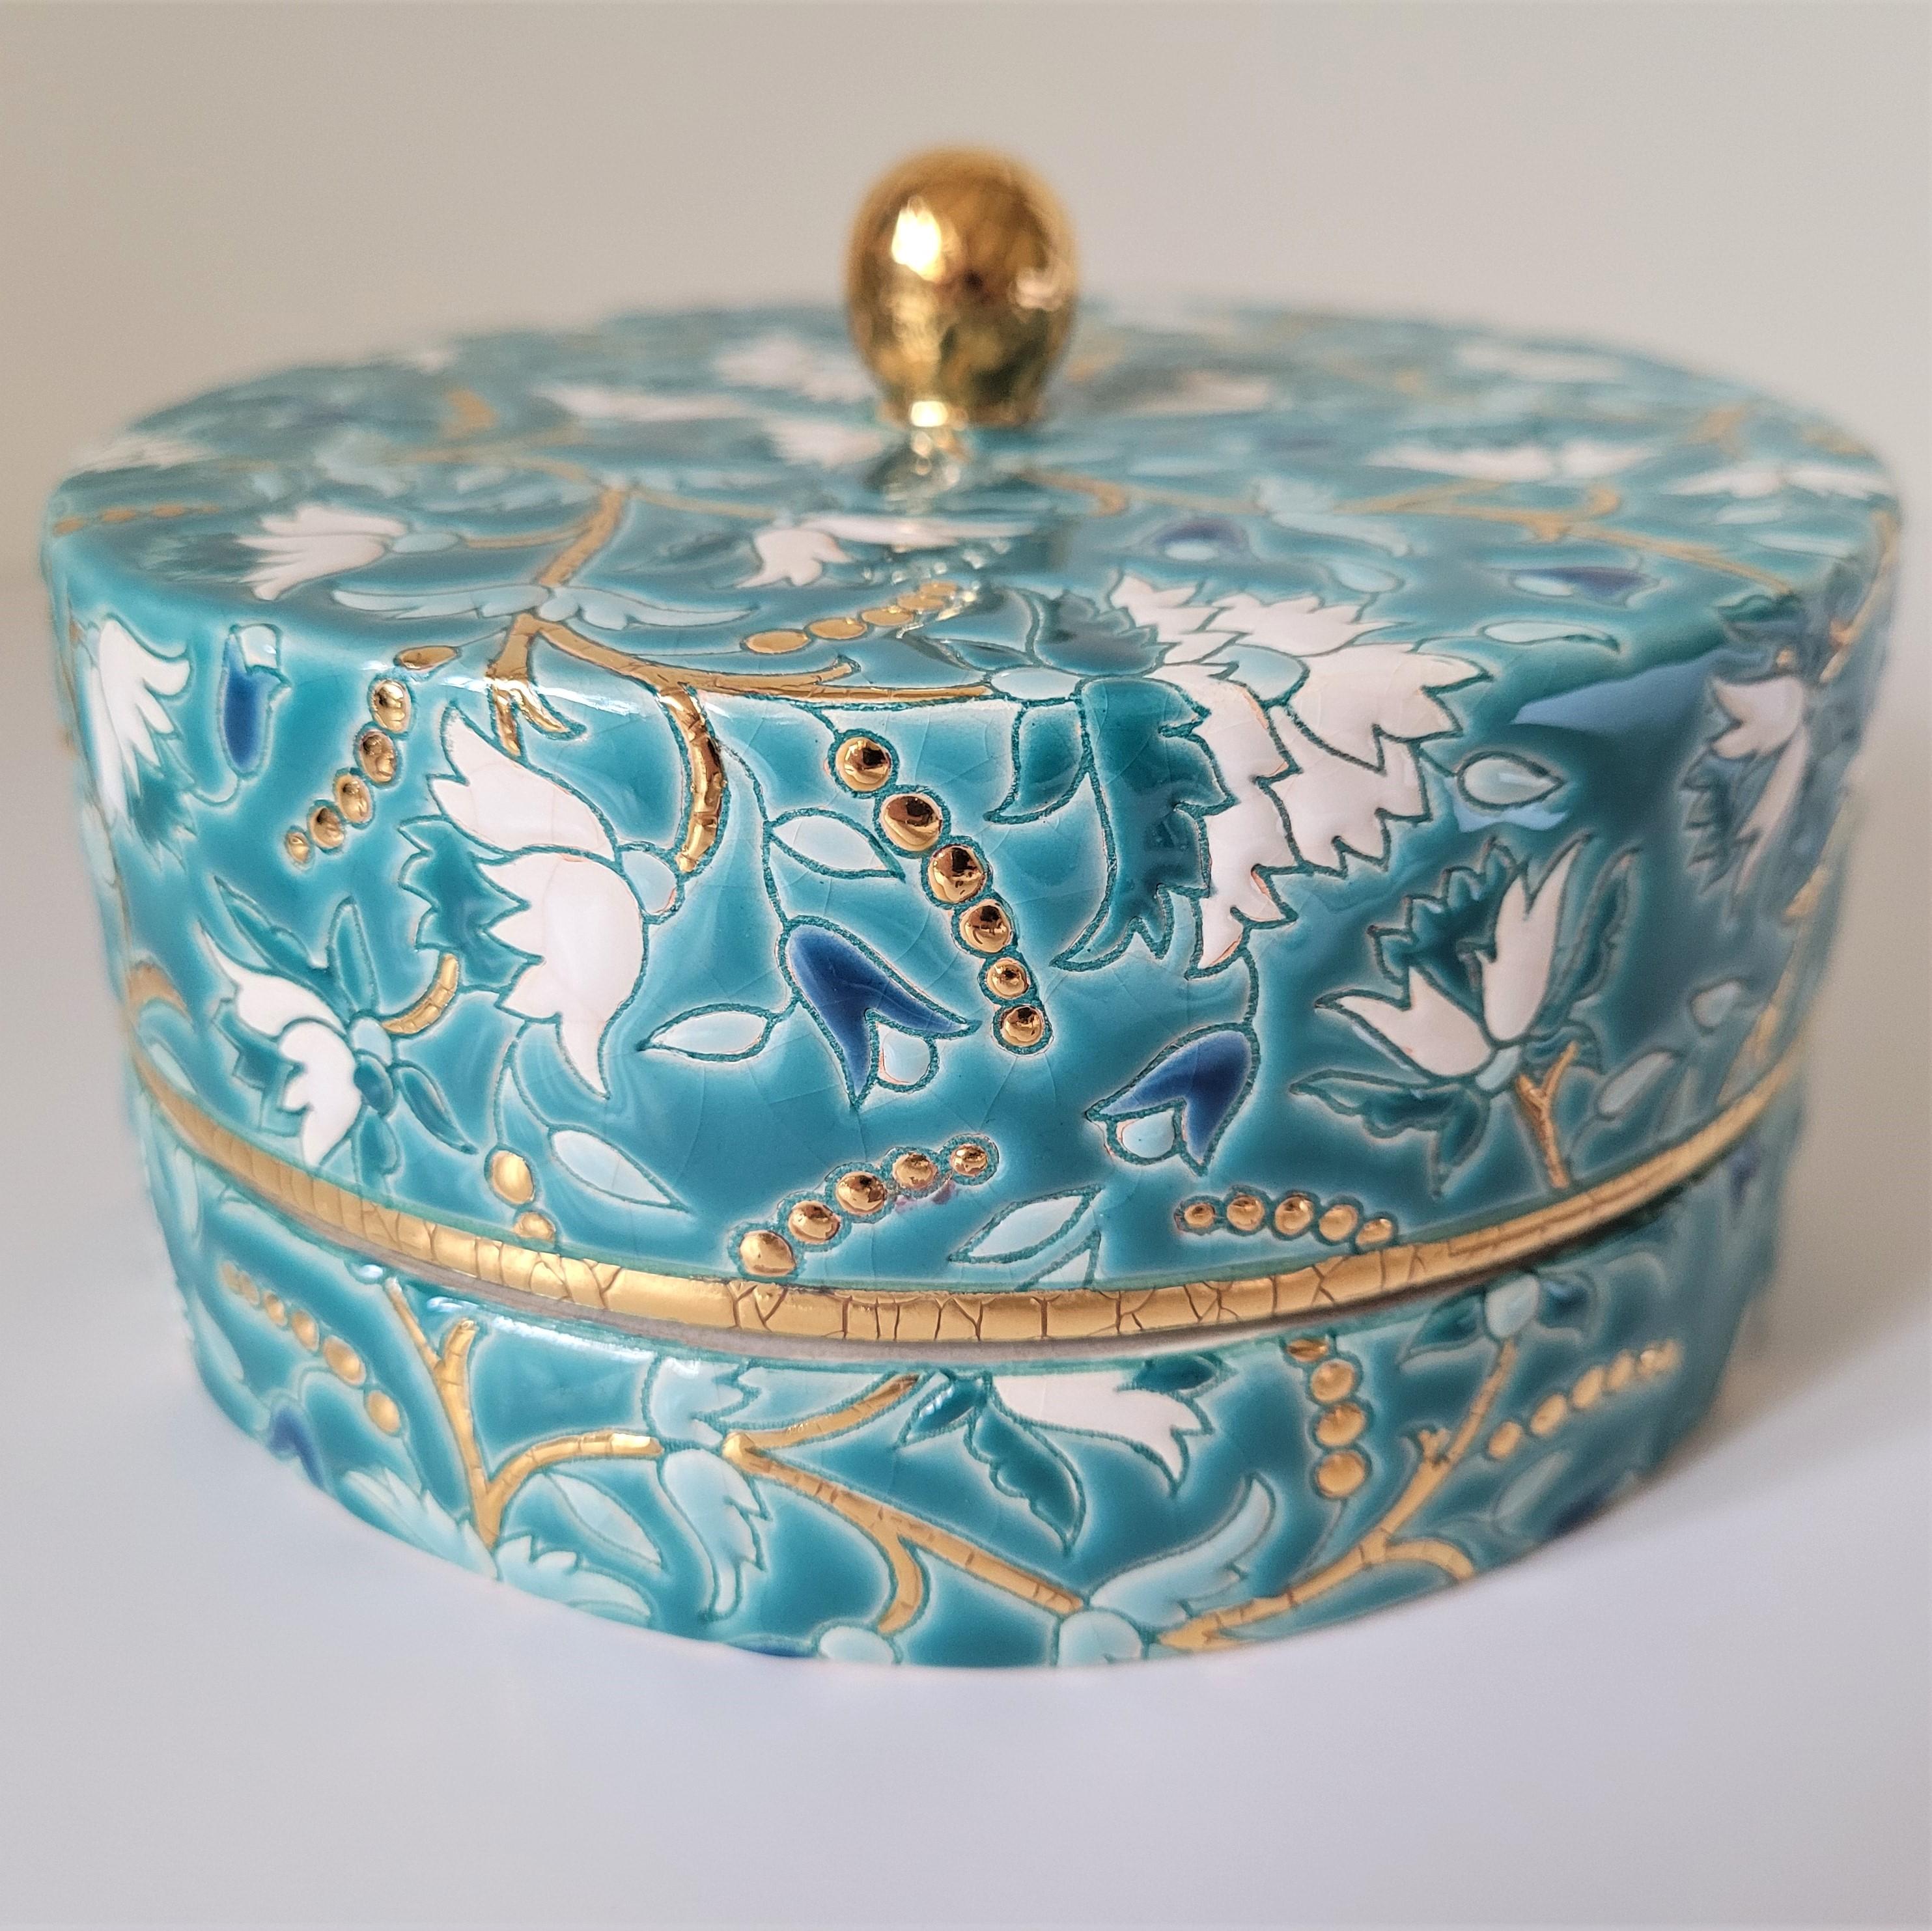 Superb Boîte à Caviar (caviar dish) in Art Deco style. From the Heritage Collection, the dish is decorated with the classic flower motif in varying shades of blue-green and white, with gold stems.

The knob and the rim are enhanced with 21 carat